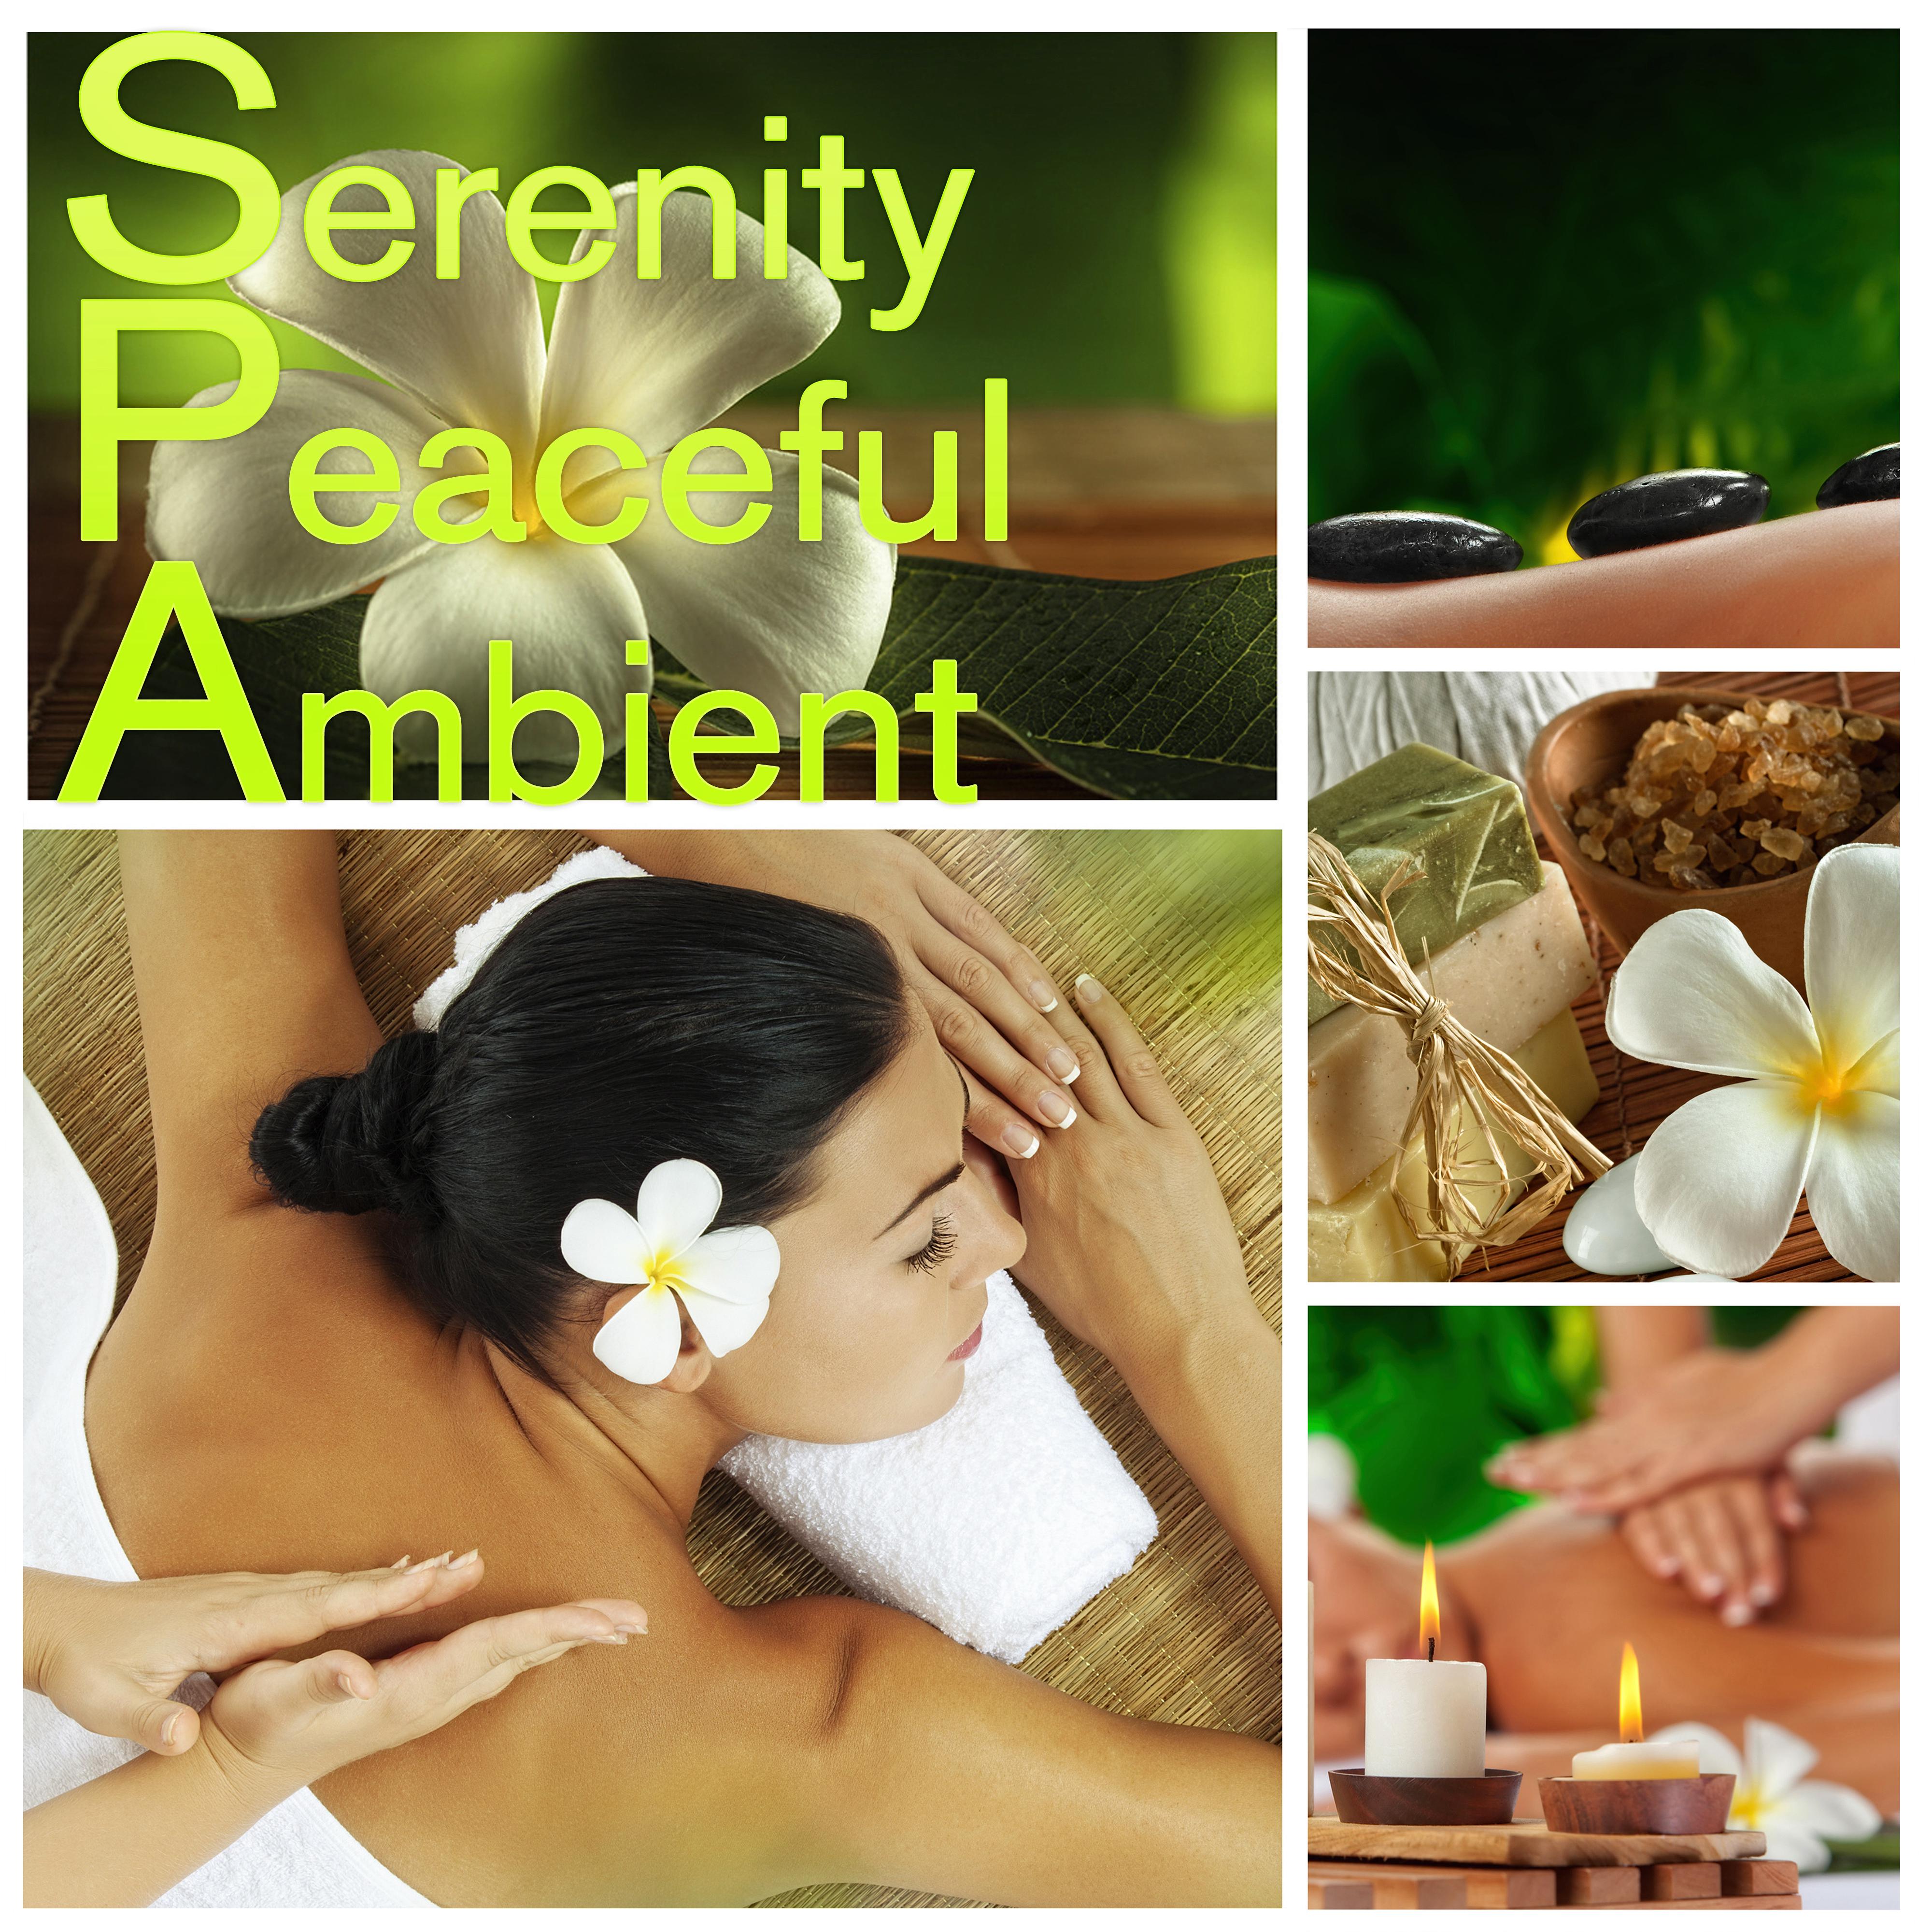 SPA Serenity Peaceful Ambient – Spa Music, Massage, Relaxation, Well Being, Liquid Songs, Sounds of Nature, Good Mood, Background Music